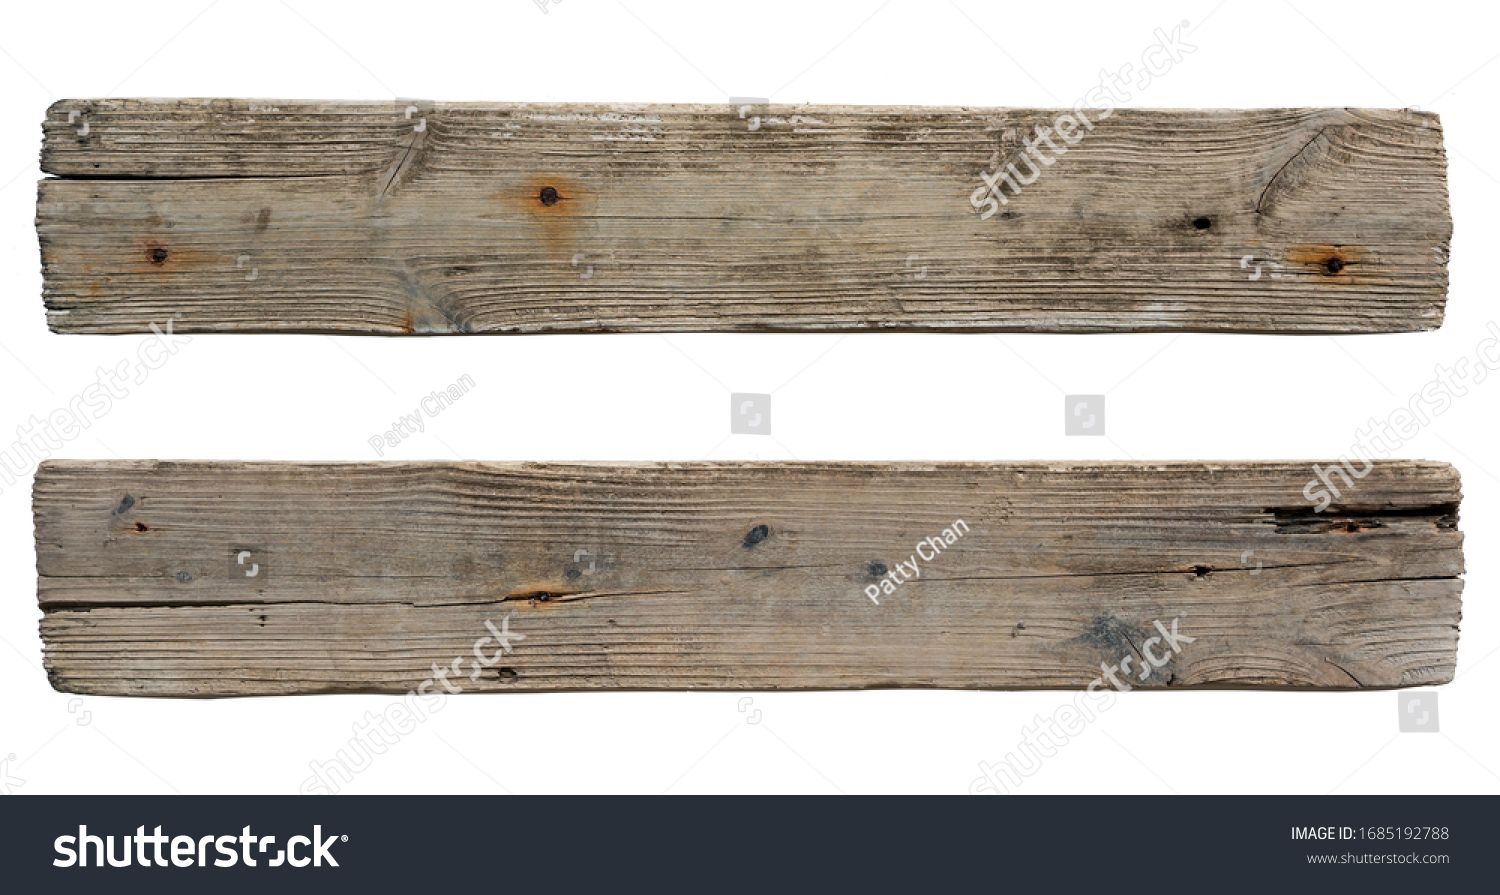 old wooden sign board background. plank wood isolated for design art work or add text message. #1685192788